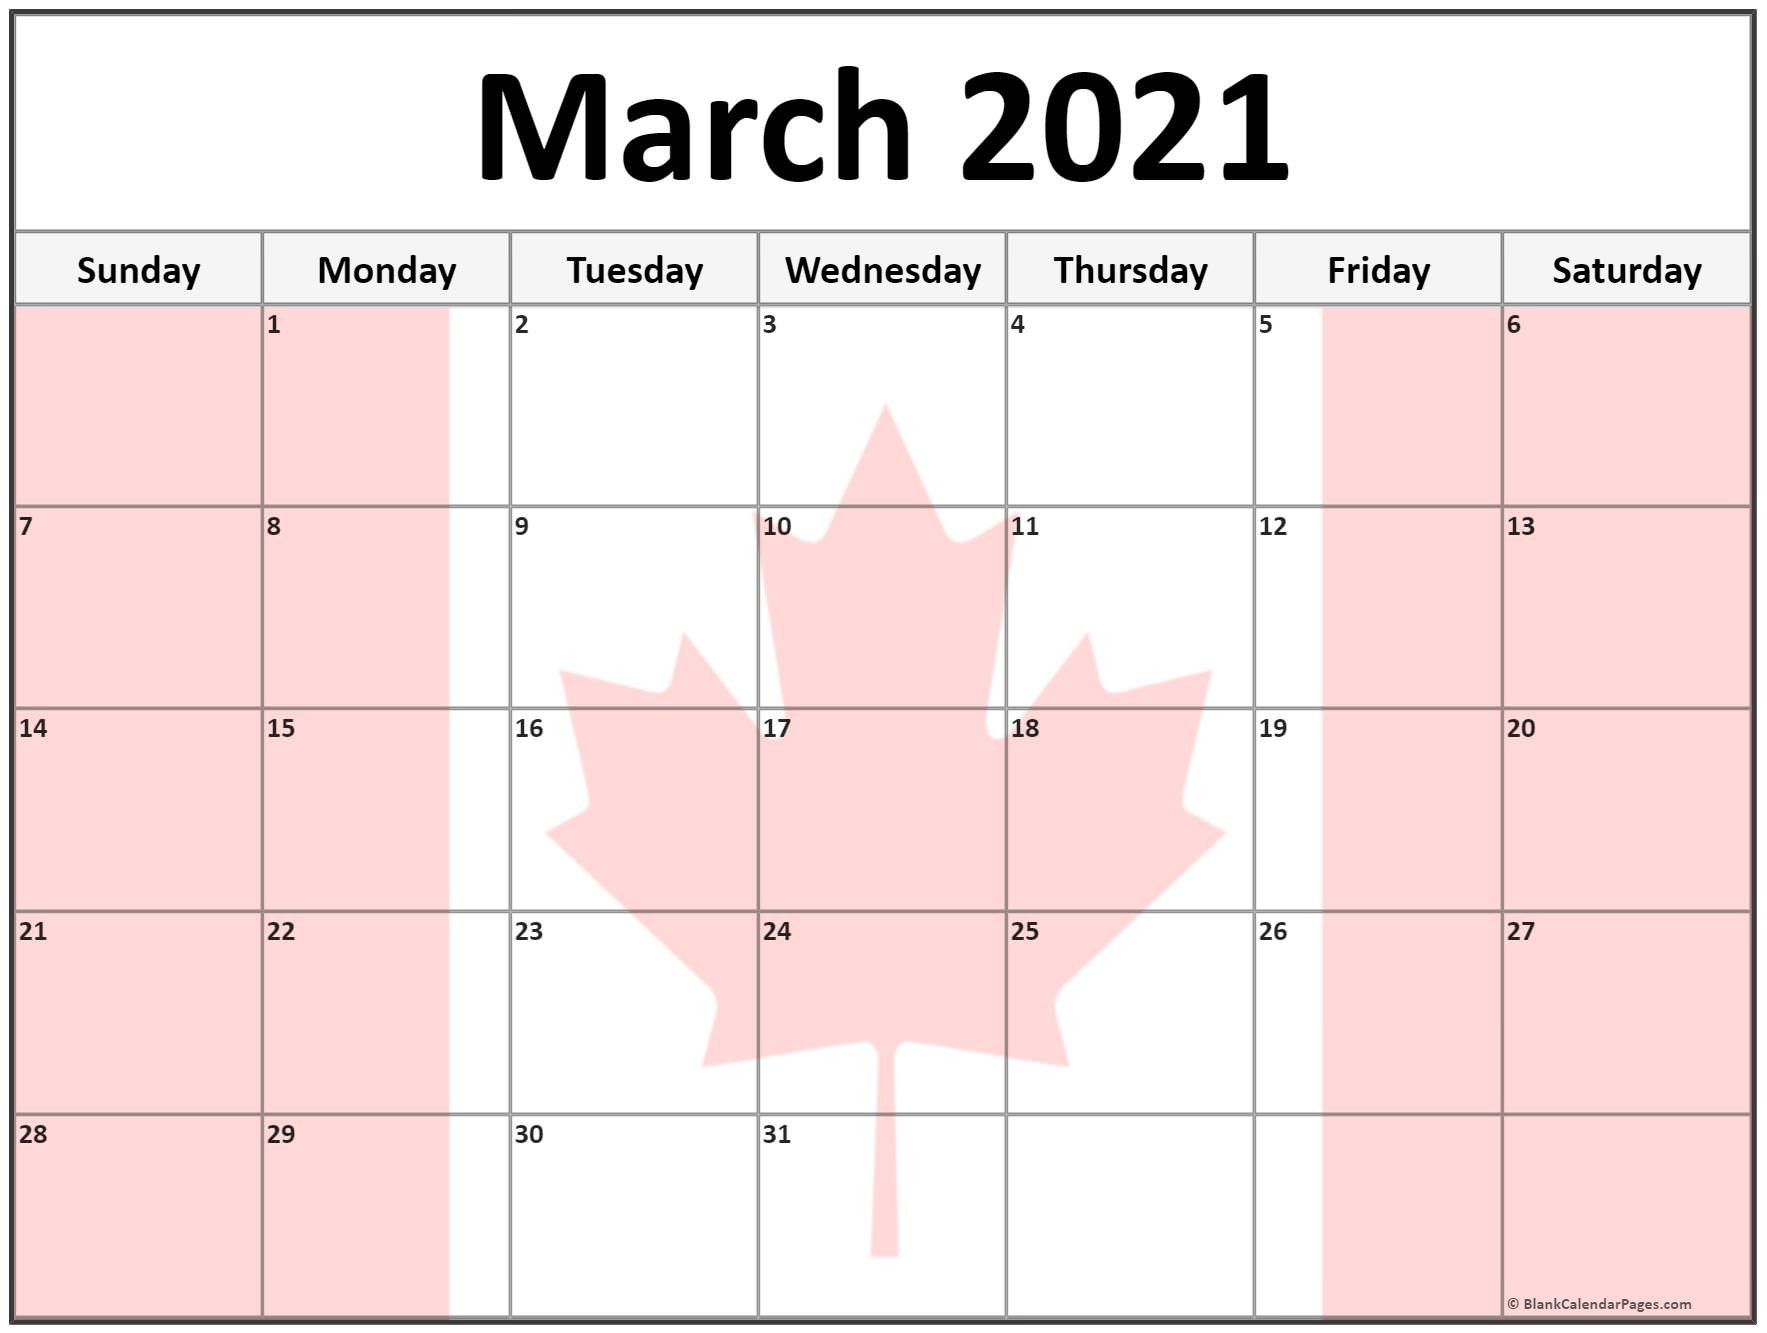 March April 2021 Calendar Australia Flag Collection Of March 2021 Photo Calendars with Image Filters